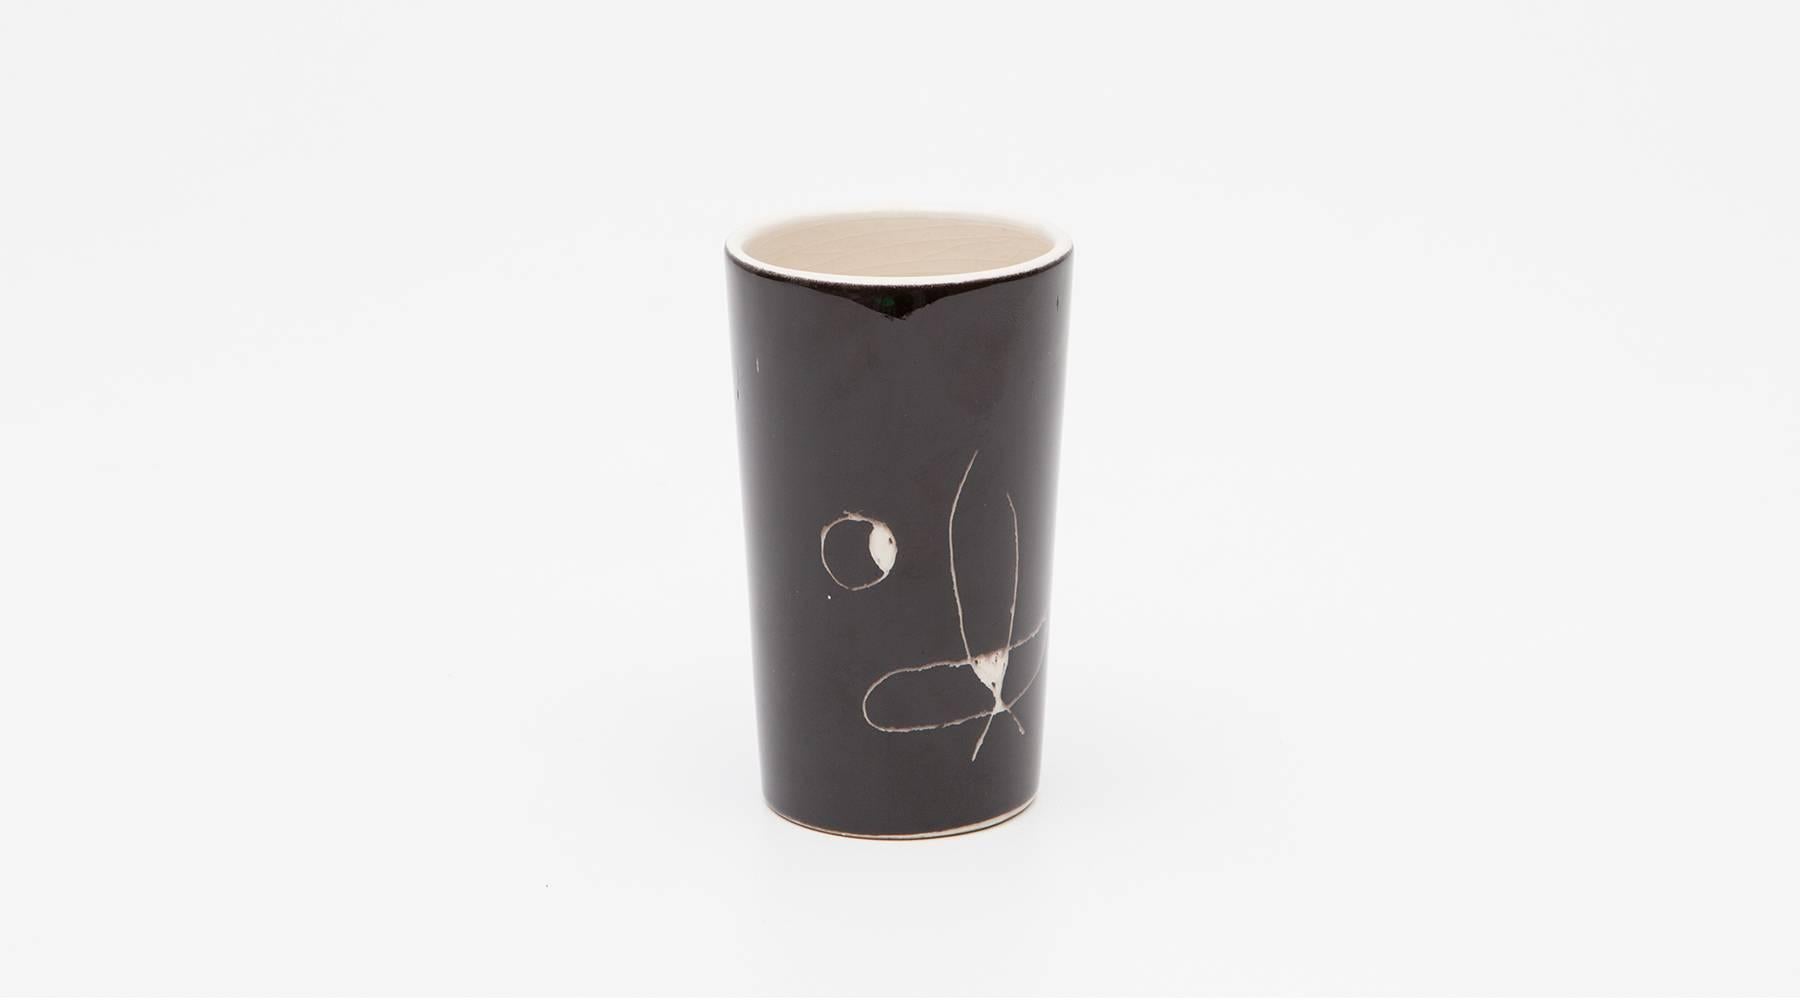 Black and White Ceramic Cup by Joan Miró 1